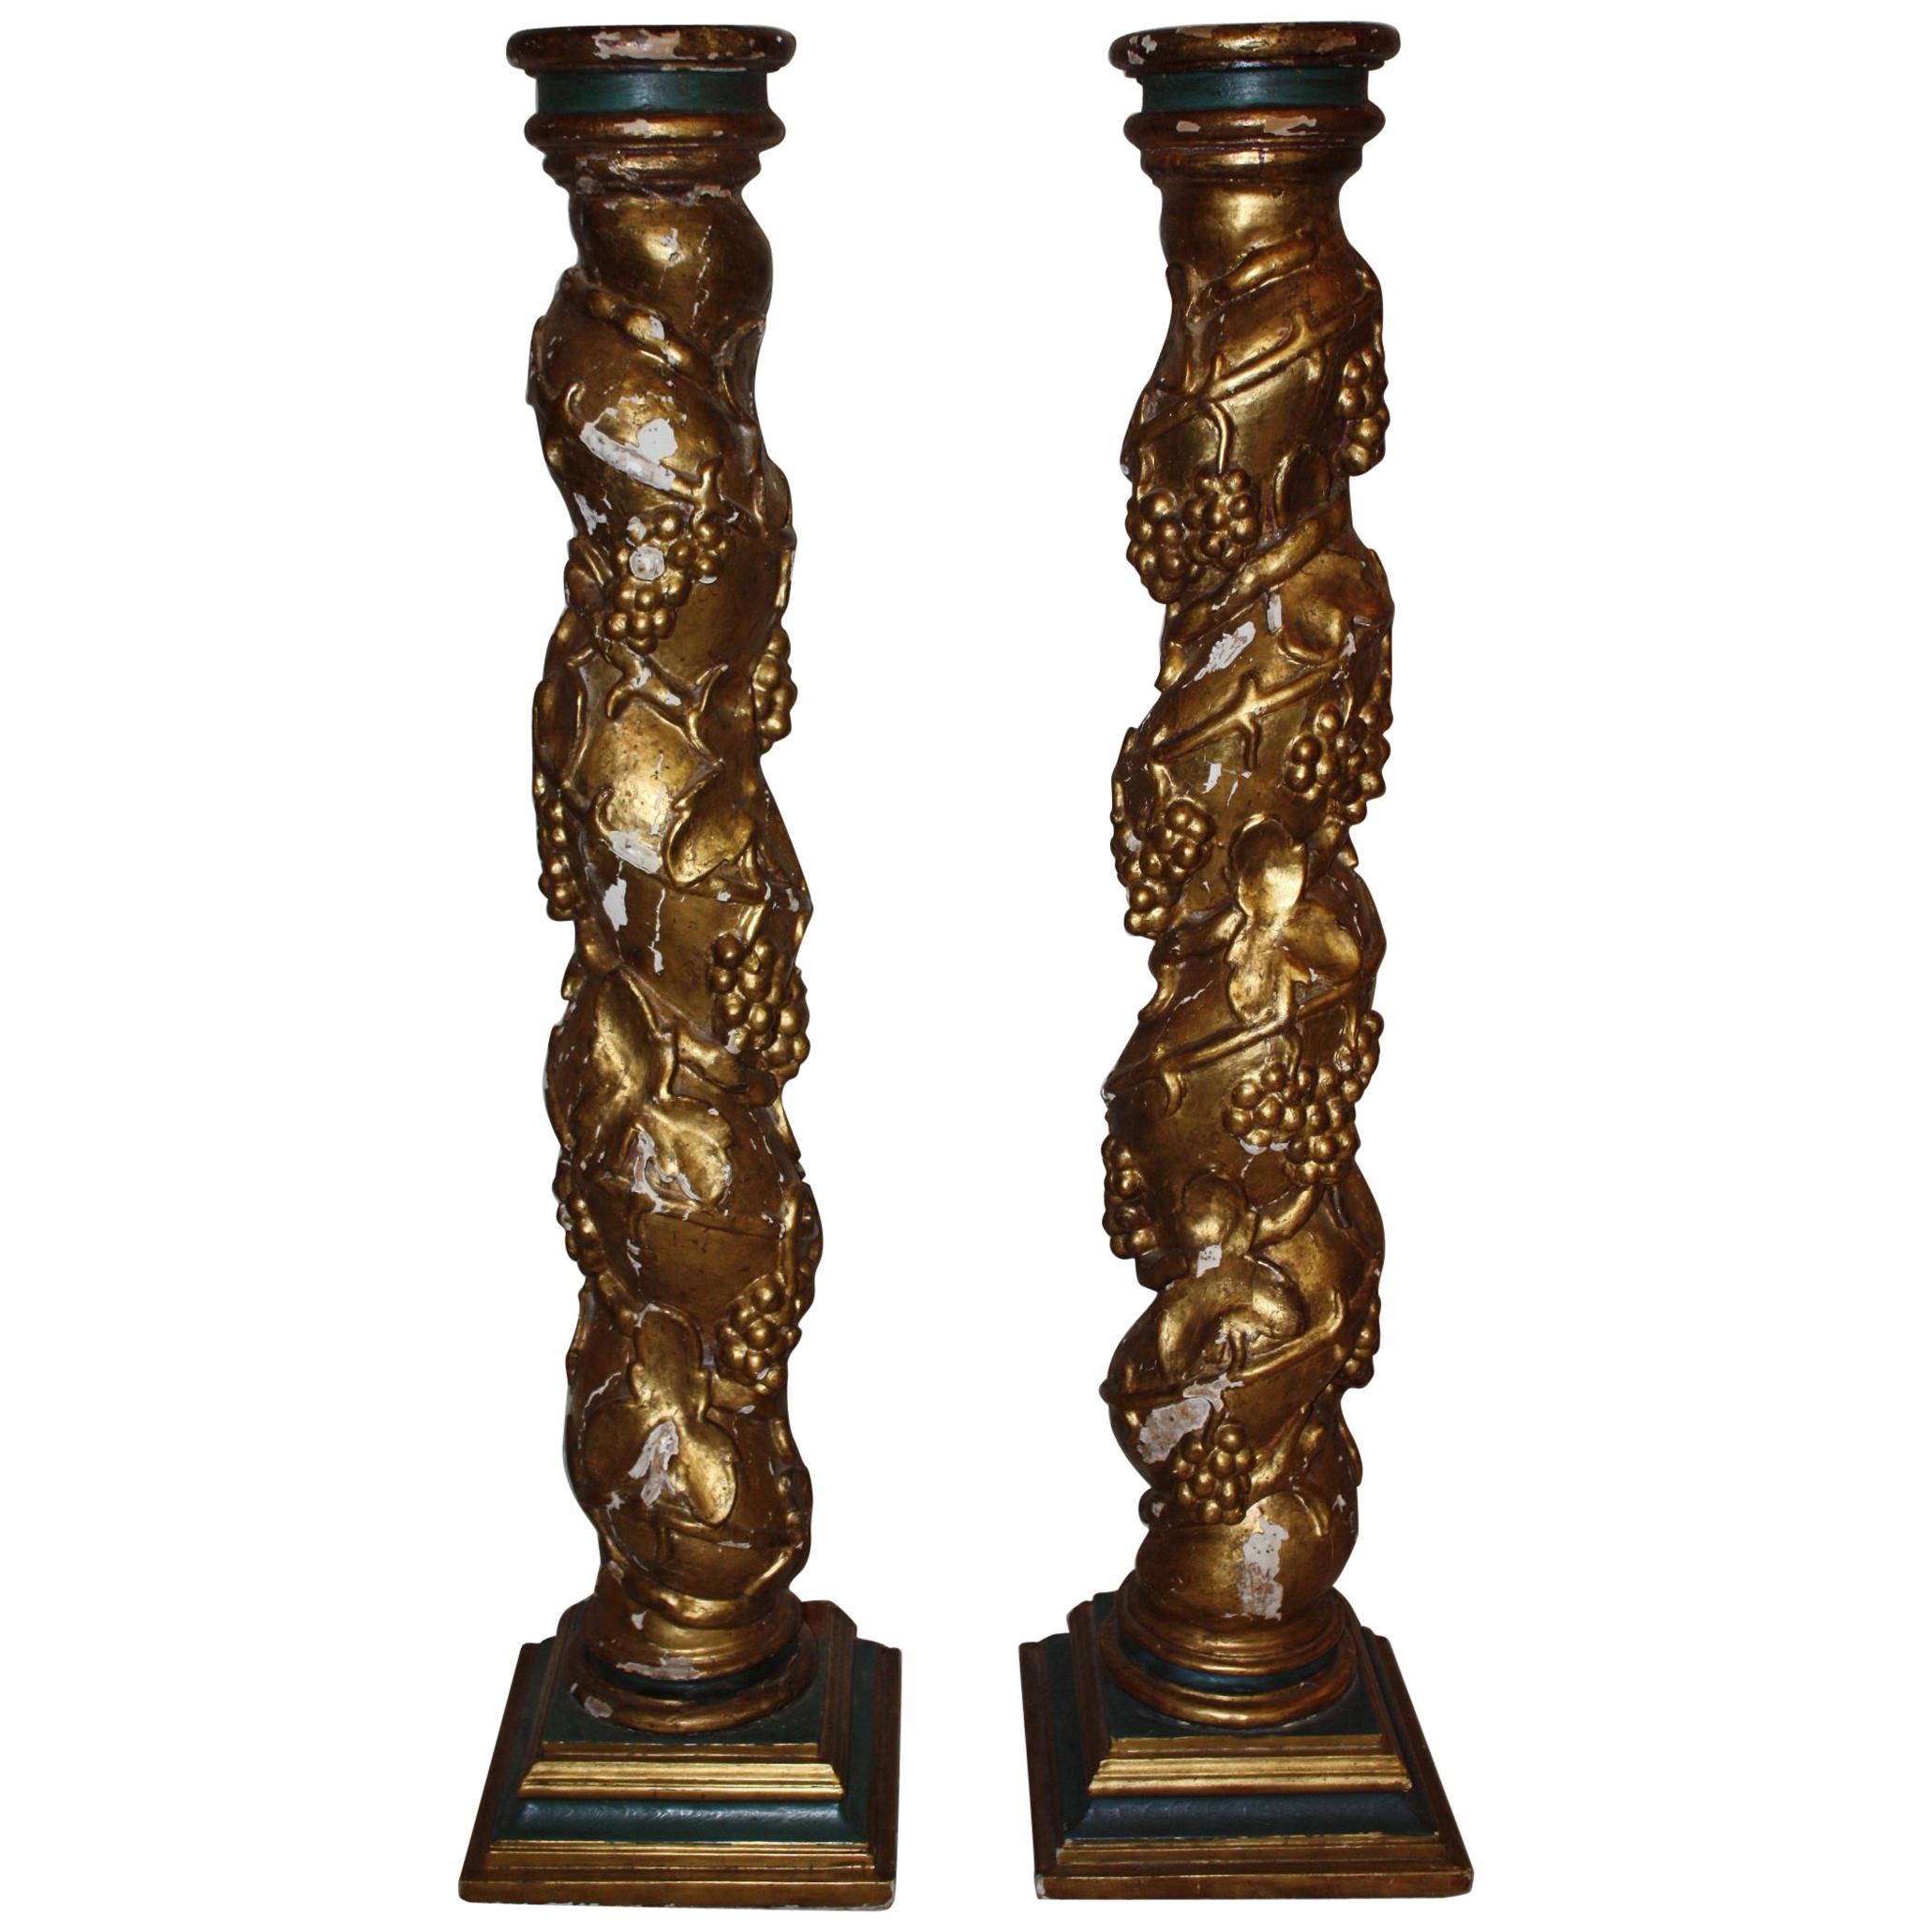 Pair of 19th Century Spanish Hand-Carved Wooden Columns